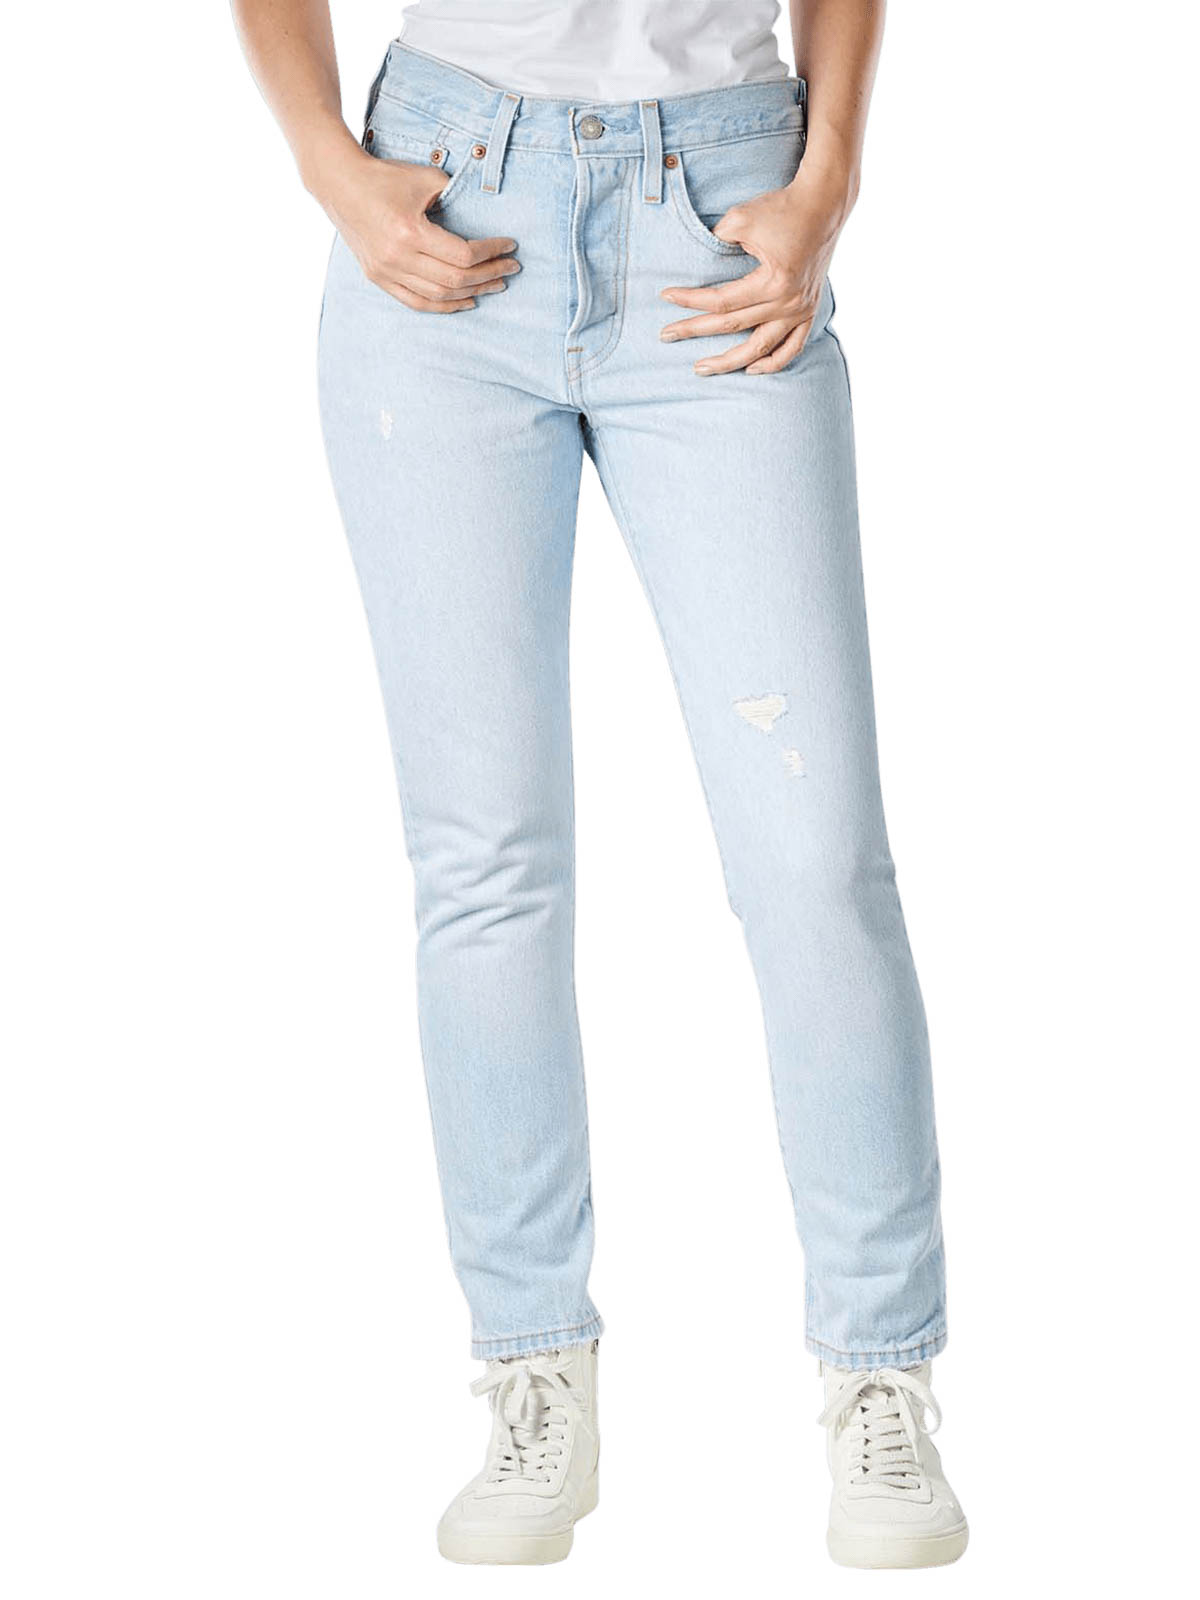 Levi's 501 Jeans Skinny Fit Ojai T3 Snow Levi's Women's Jeans | Free  Shipping on  - SIMPLY LOOK GOOD